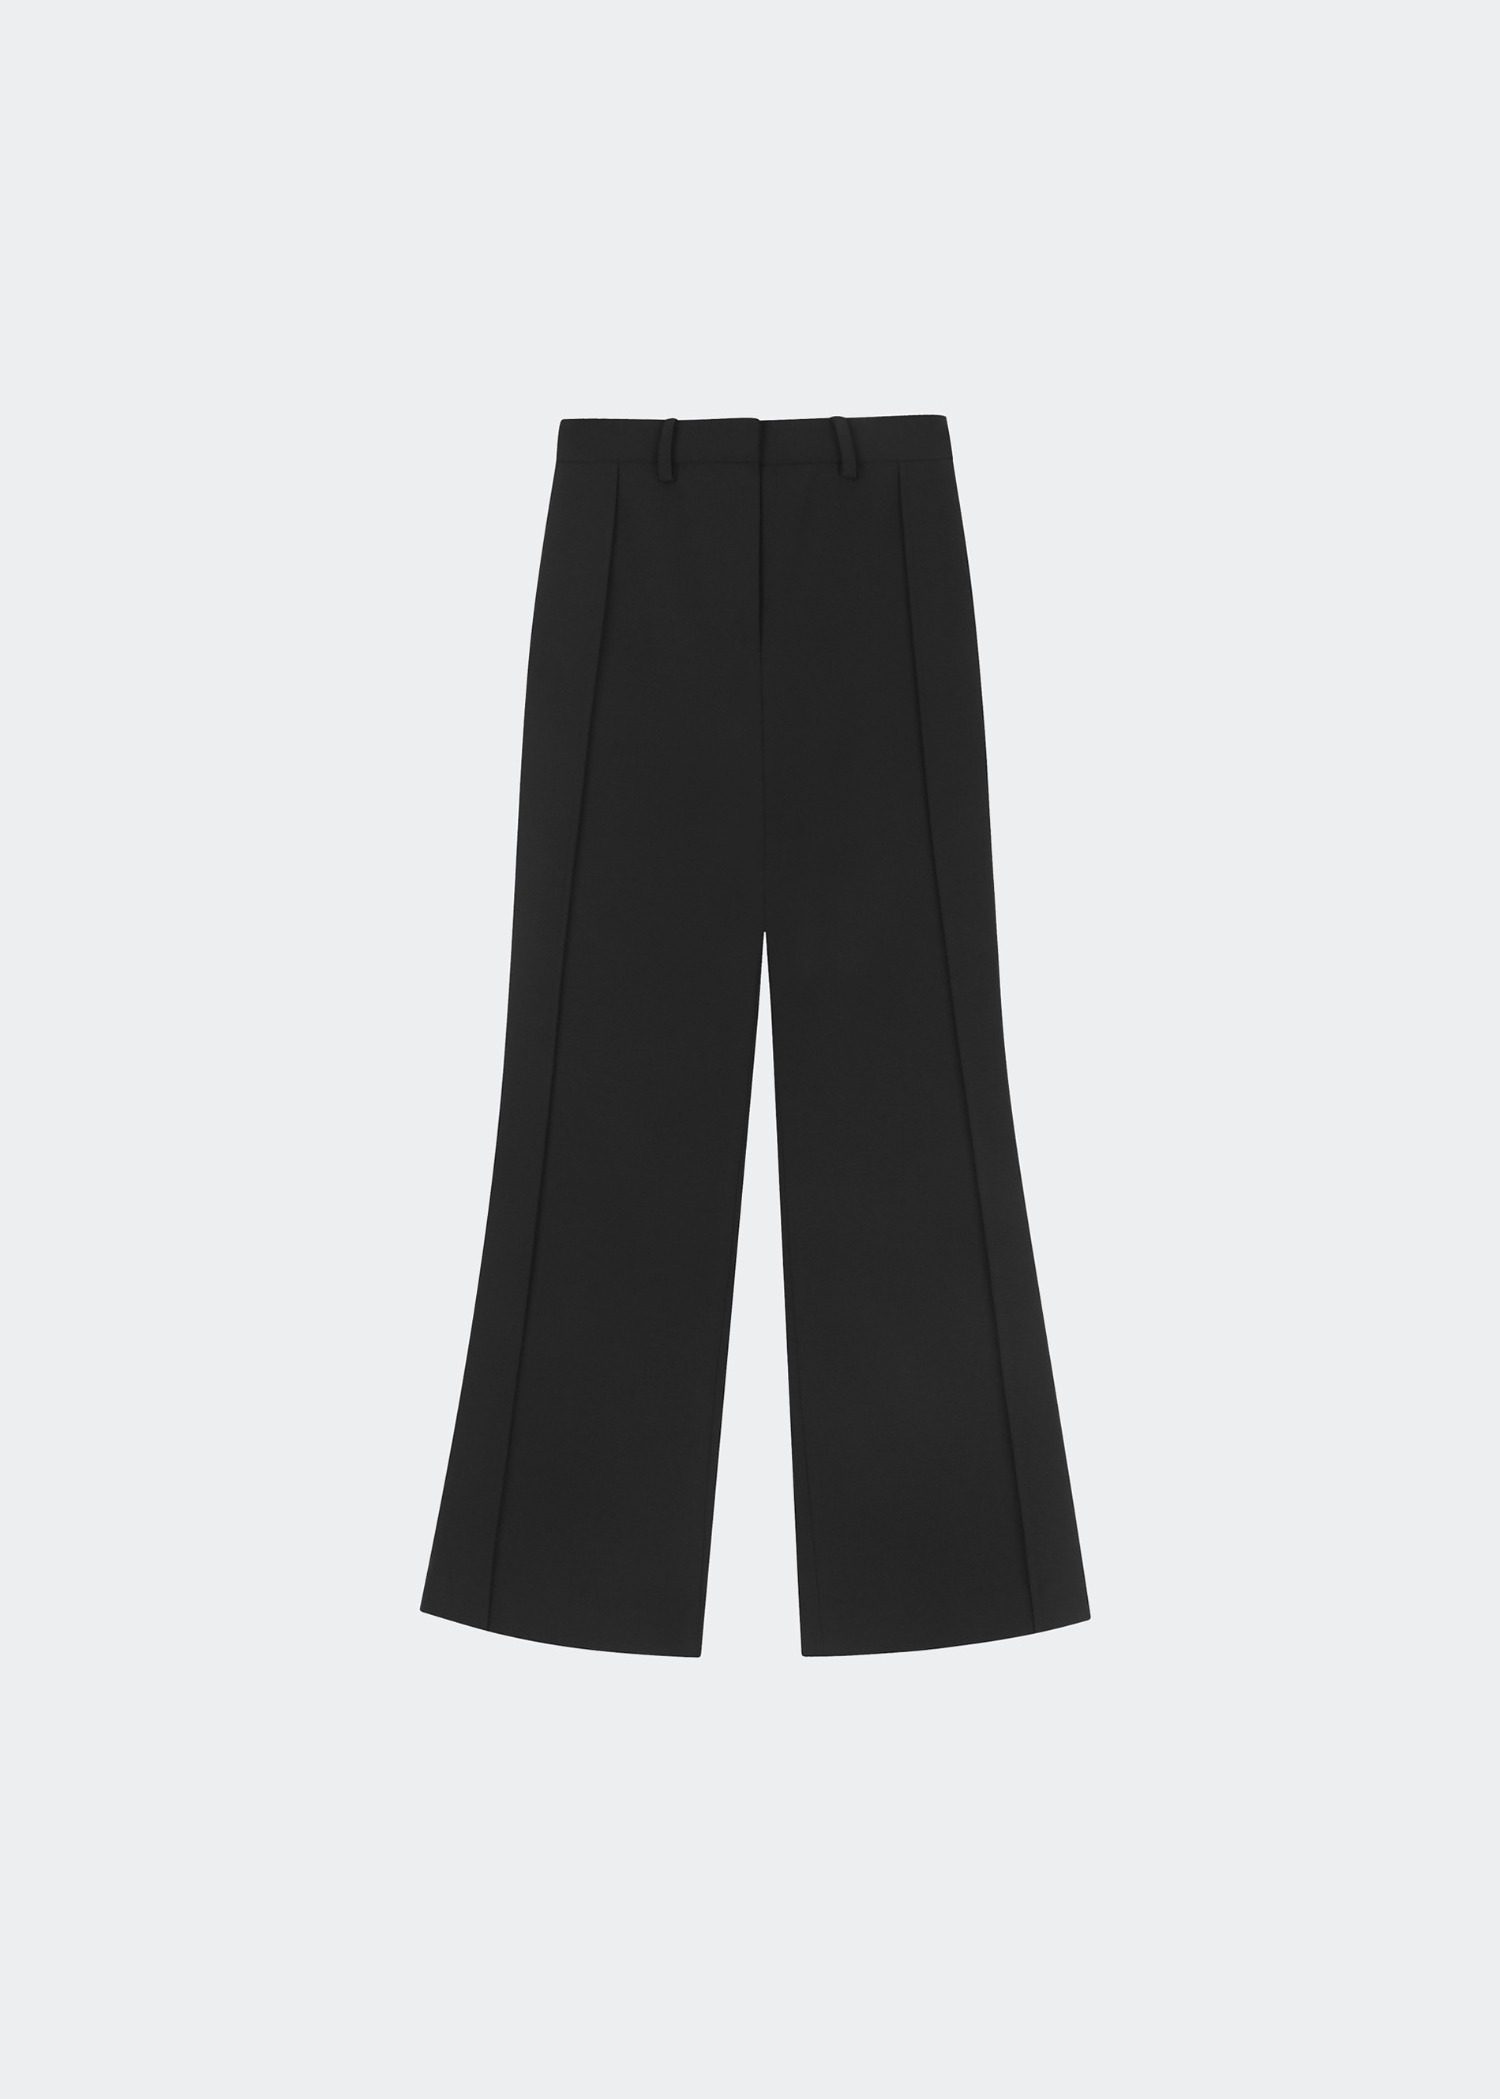 LINED BOOTS CUT TROUSERS BLACK